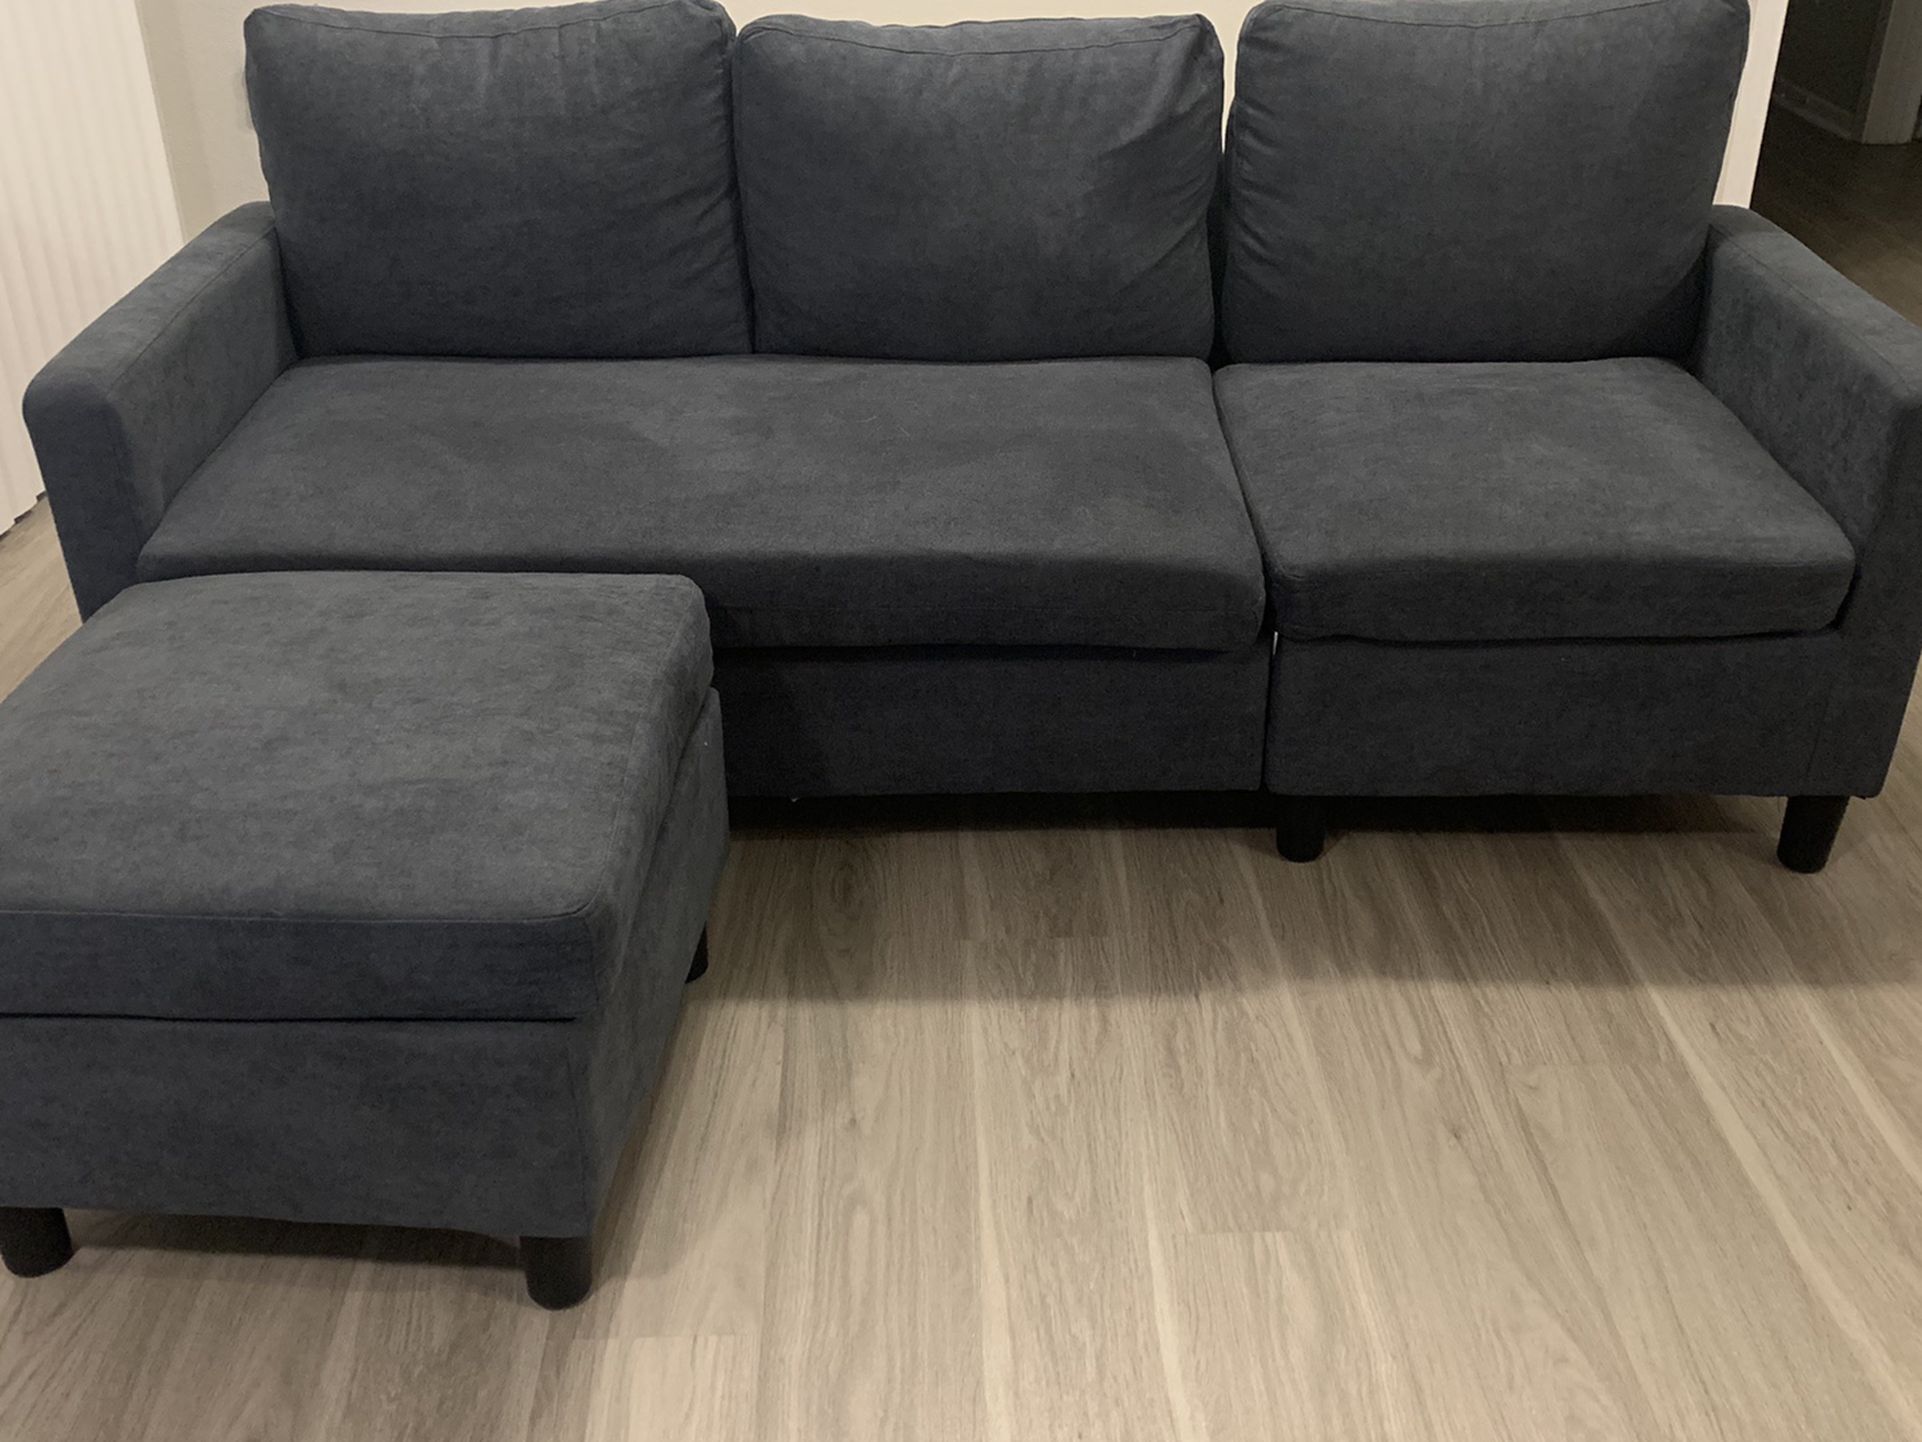 3 Seater Sectional Couch With Footstool